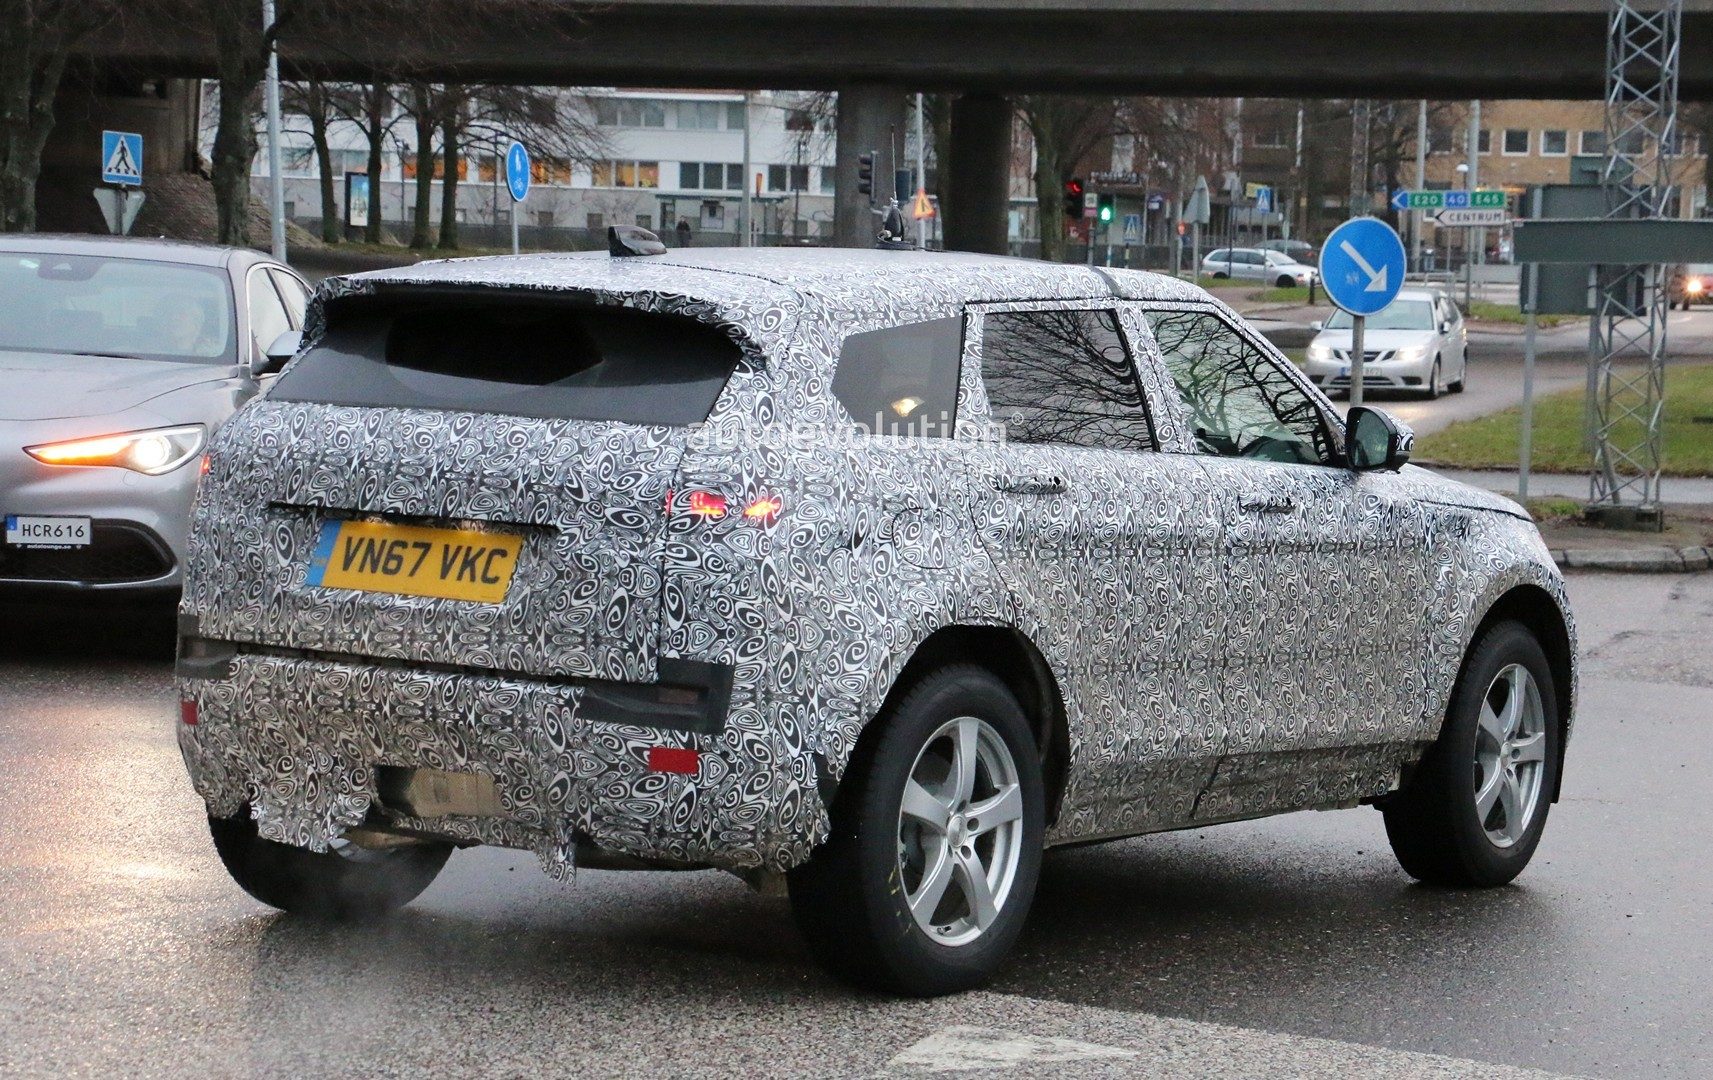 2019-range-rover-evoque-has-scraped-its-camo-most-likely-due-to-off-roading_10.jpg